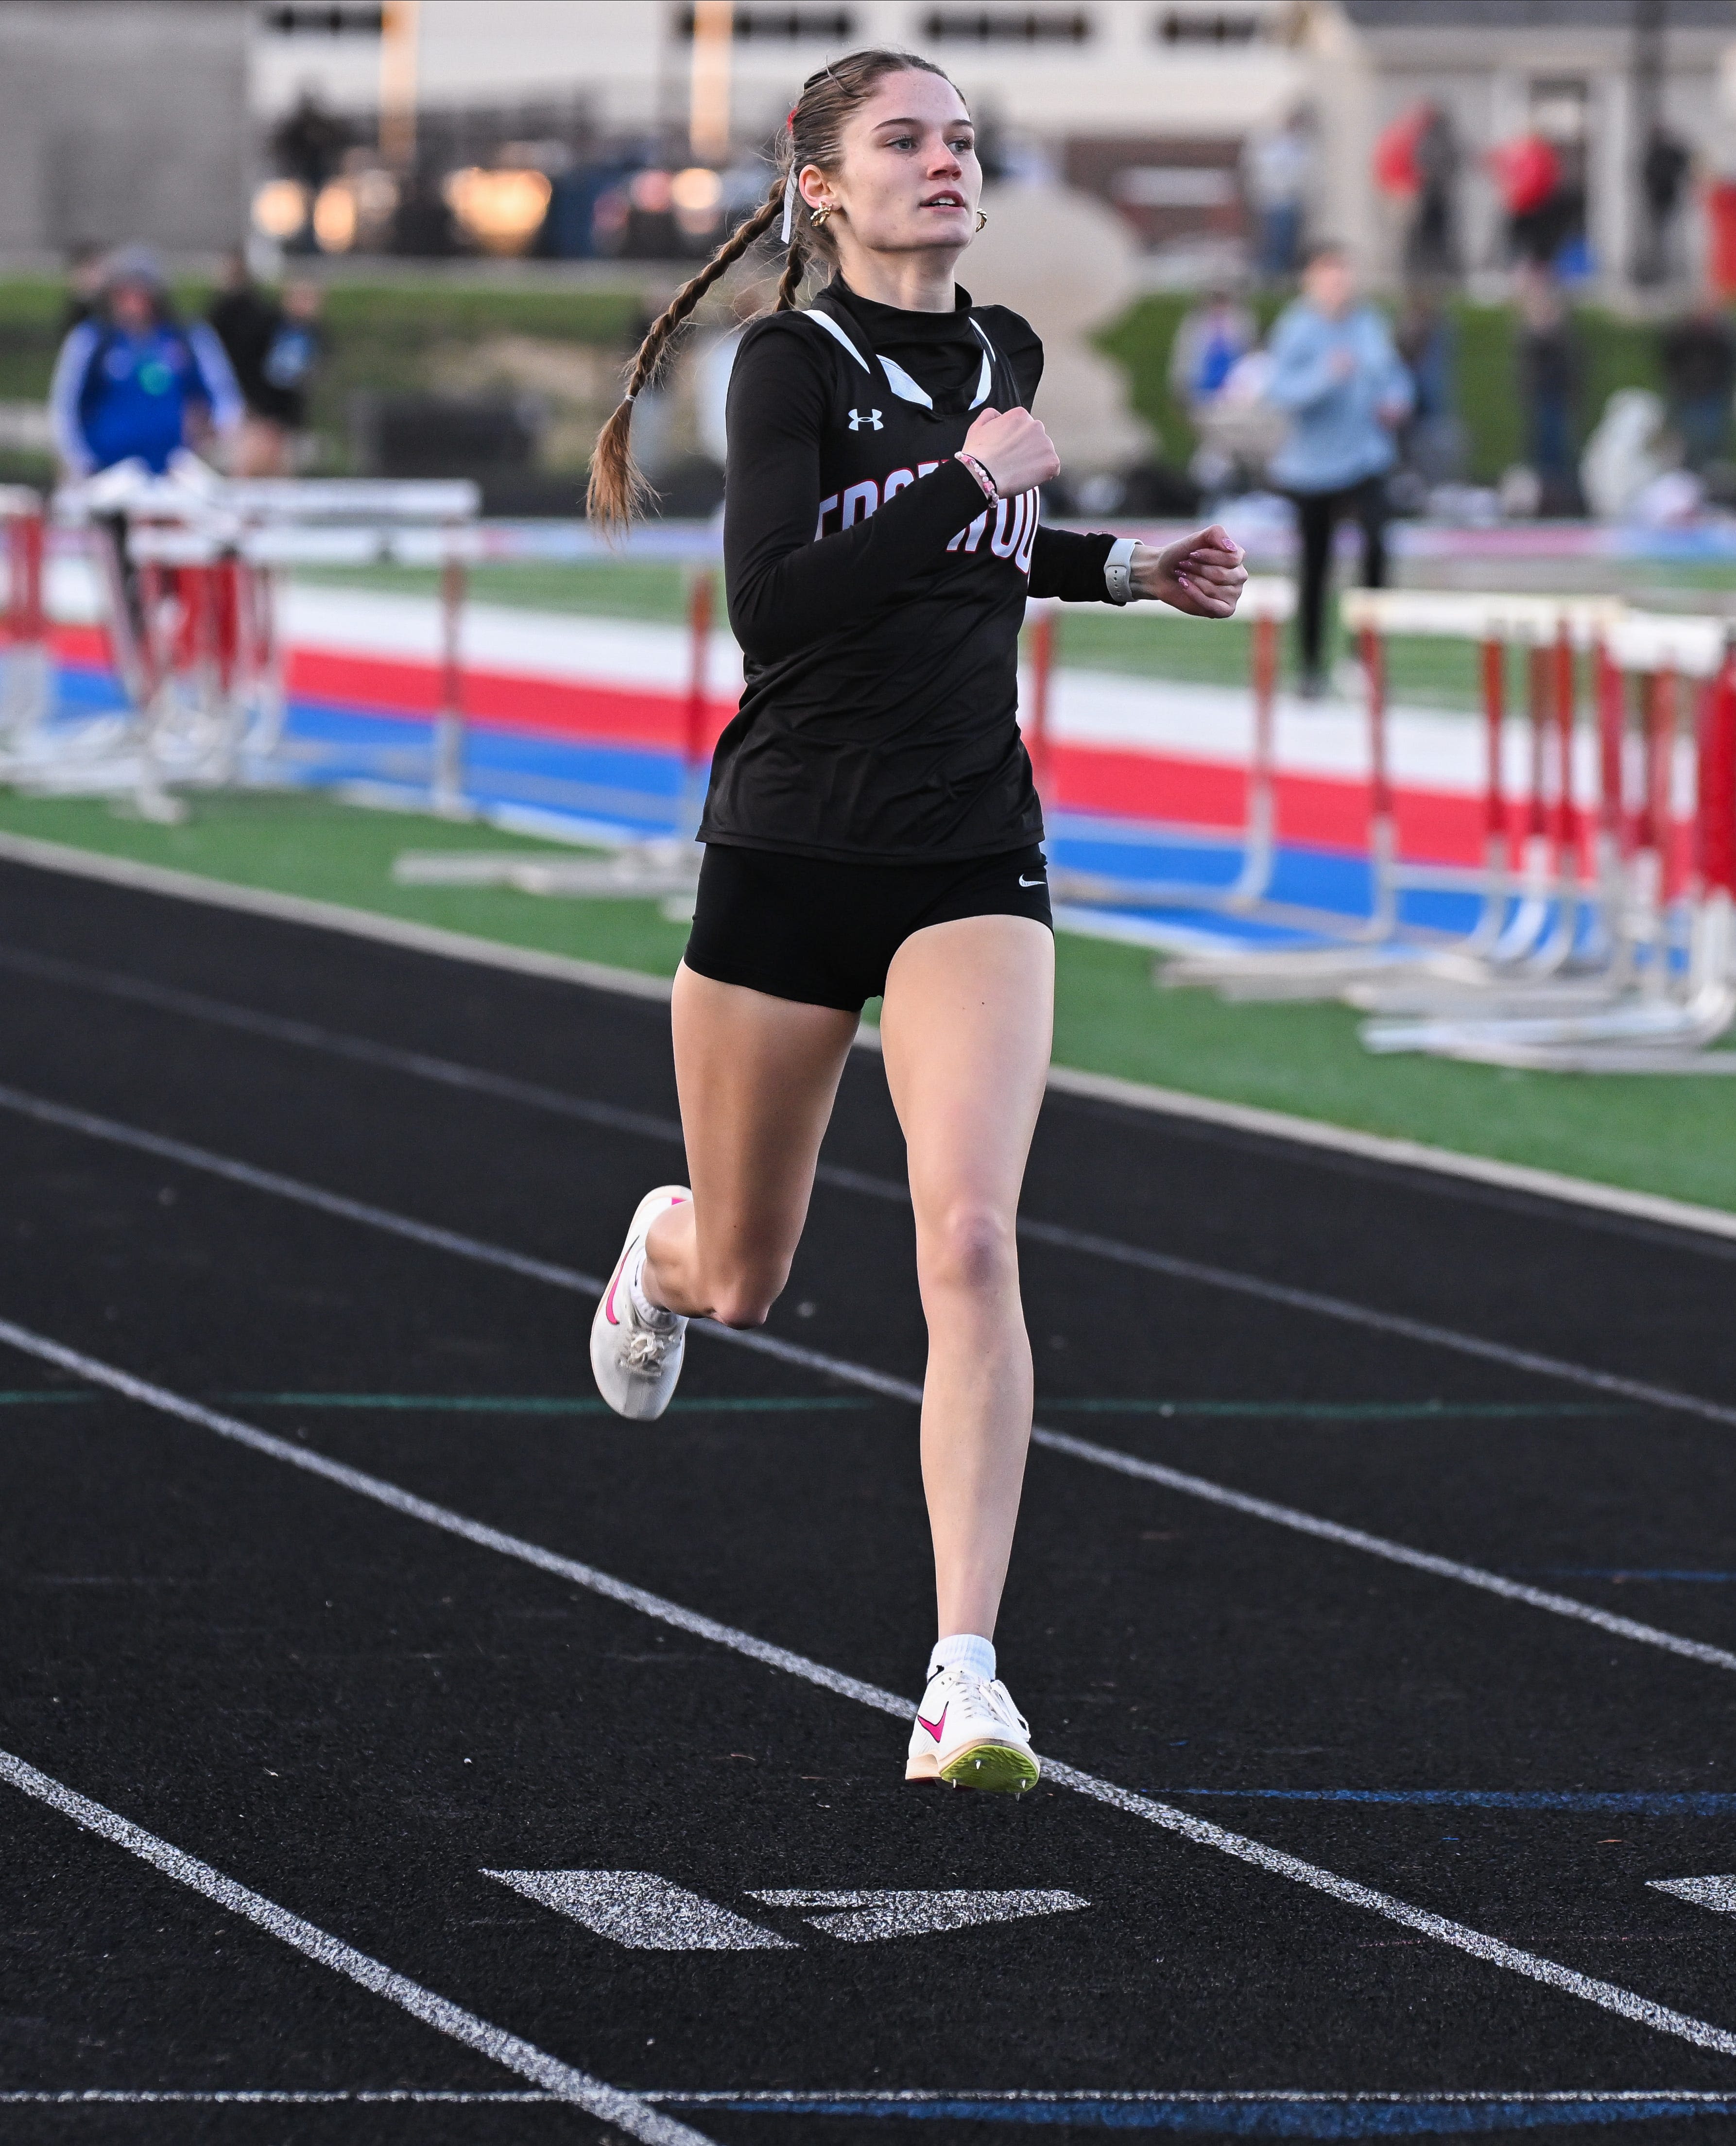 Girls track: Edwards smashes school record as Edgewood goes after WIC 4-peat